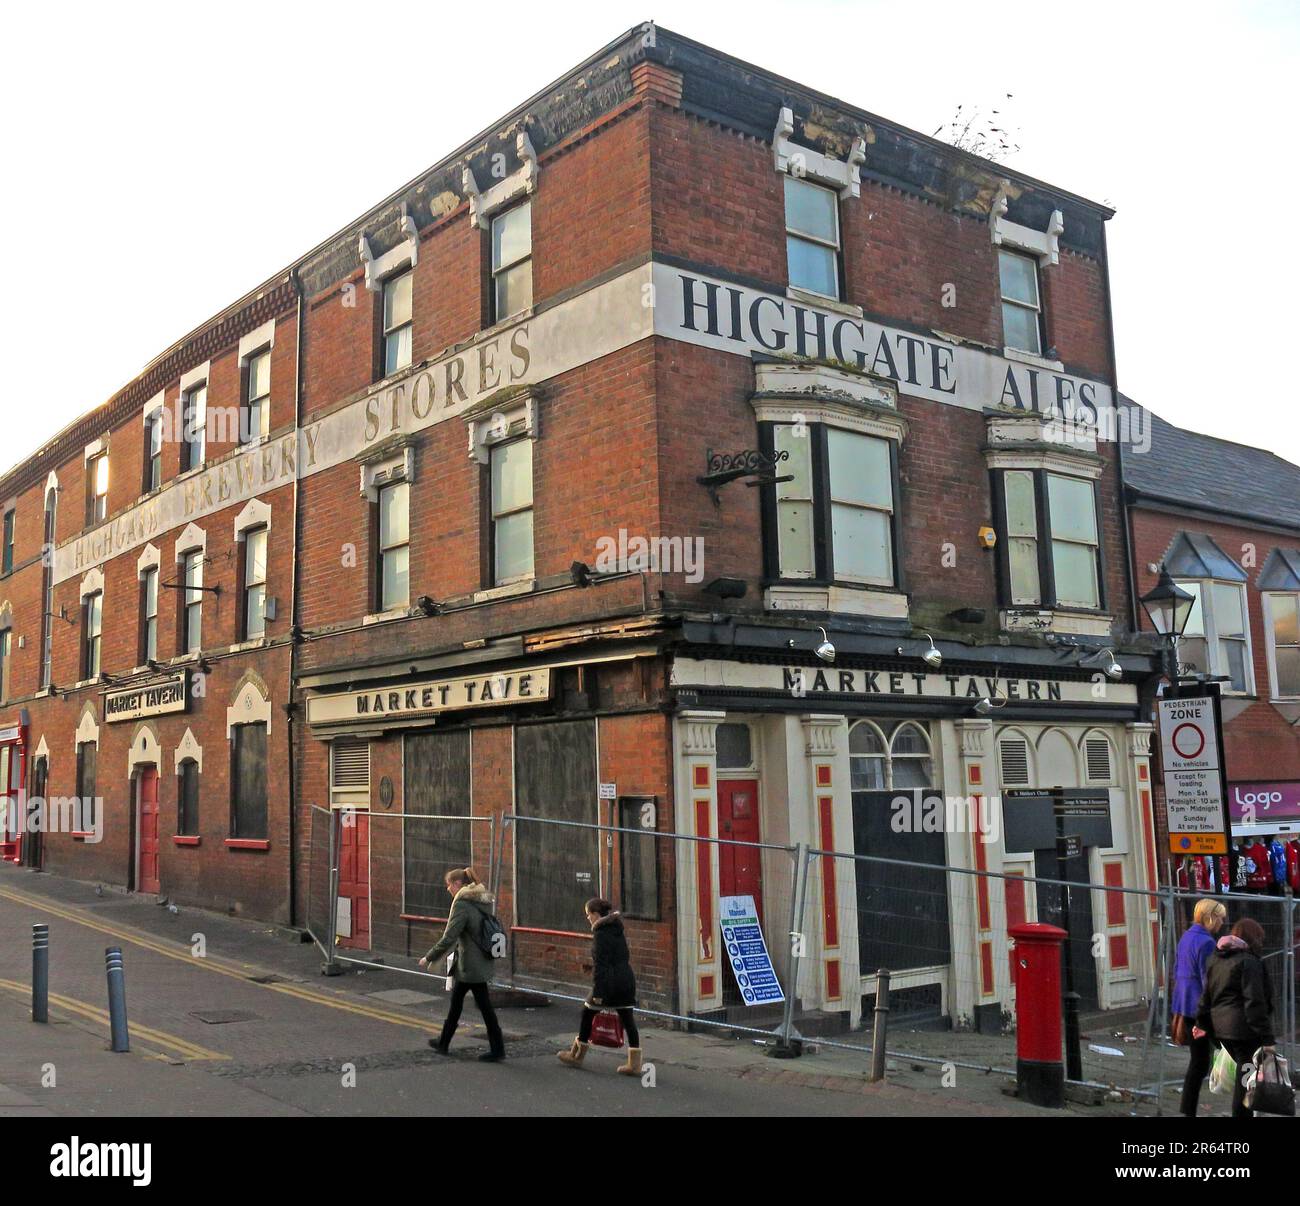 The Market Tavern, Highgate Brewery Building, à l'angle de George Street, Walsall, West Midlands, Angleterre, Royaume-Uni, WS1 1QR Banque D'Images